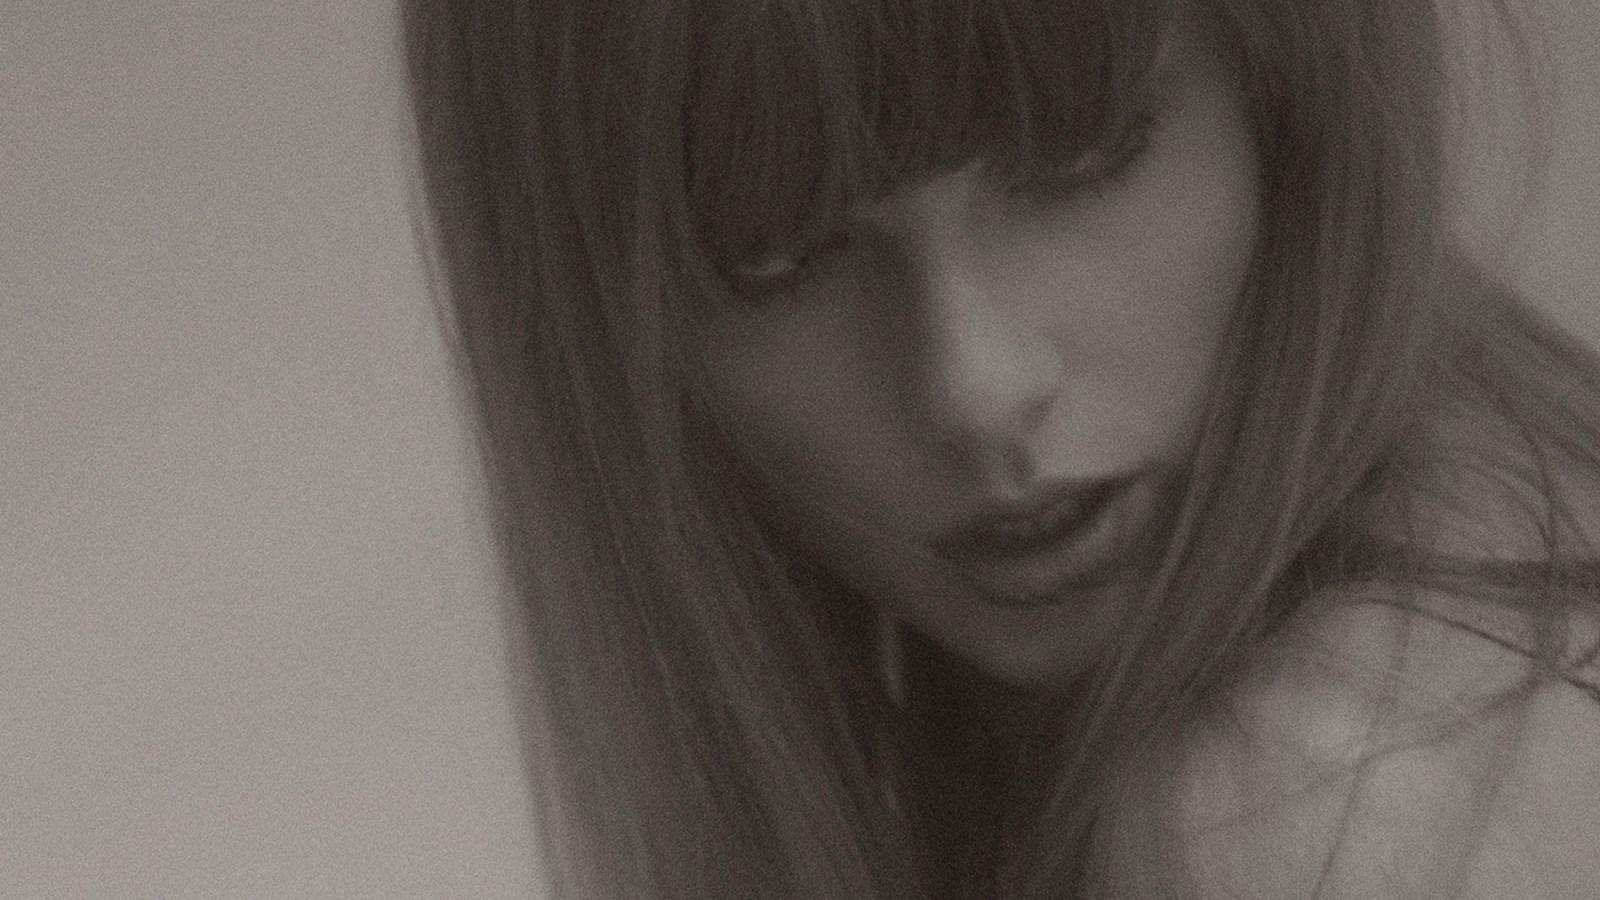 This time, Taylor Swift is dead